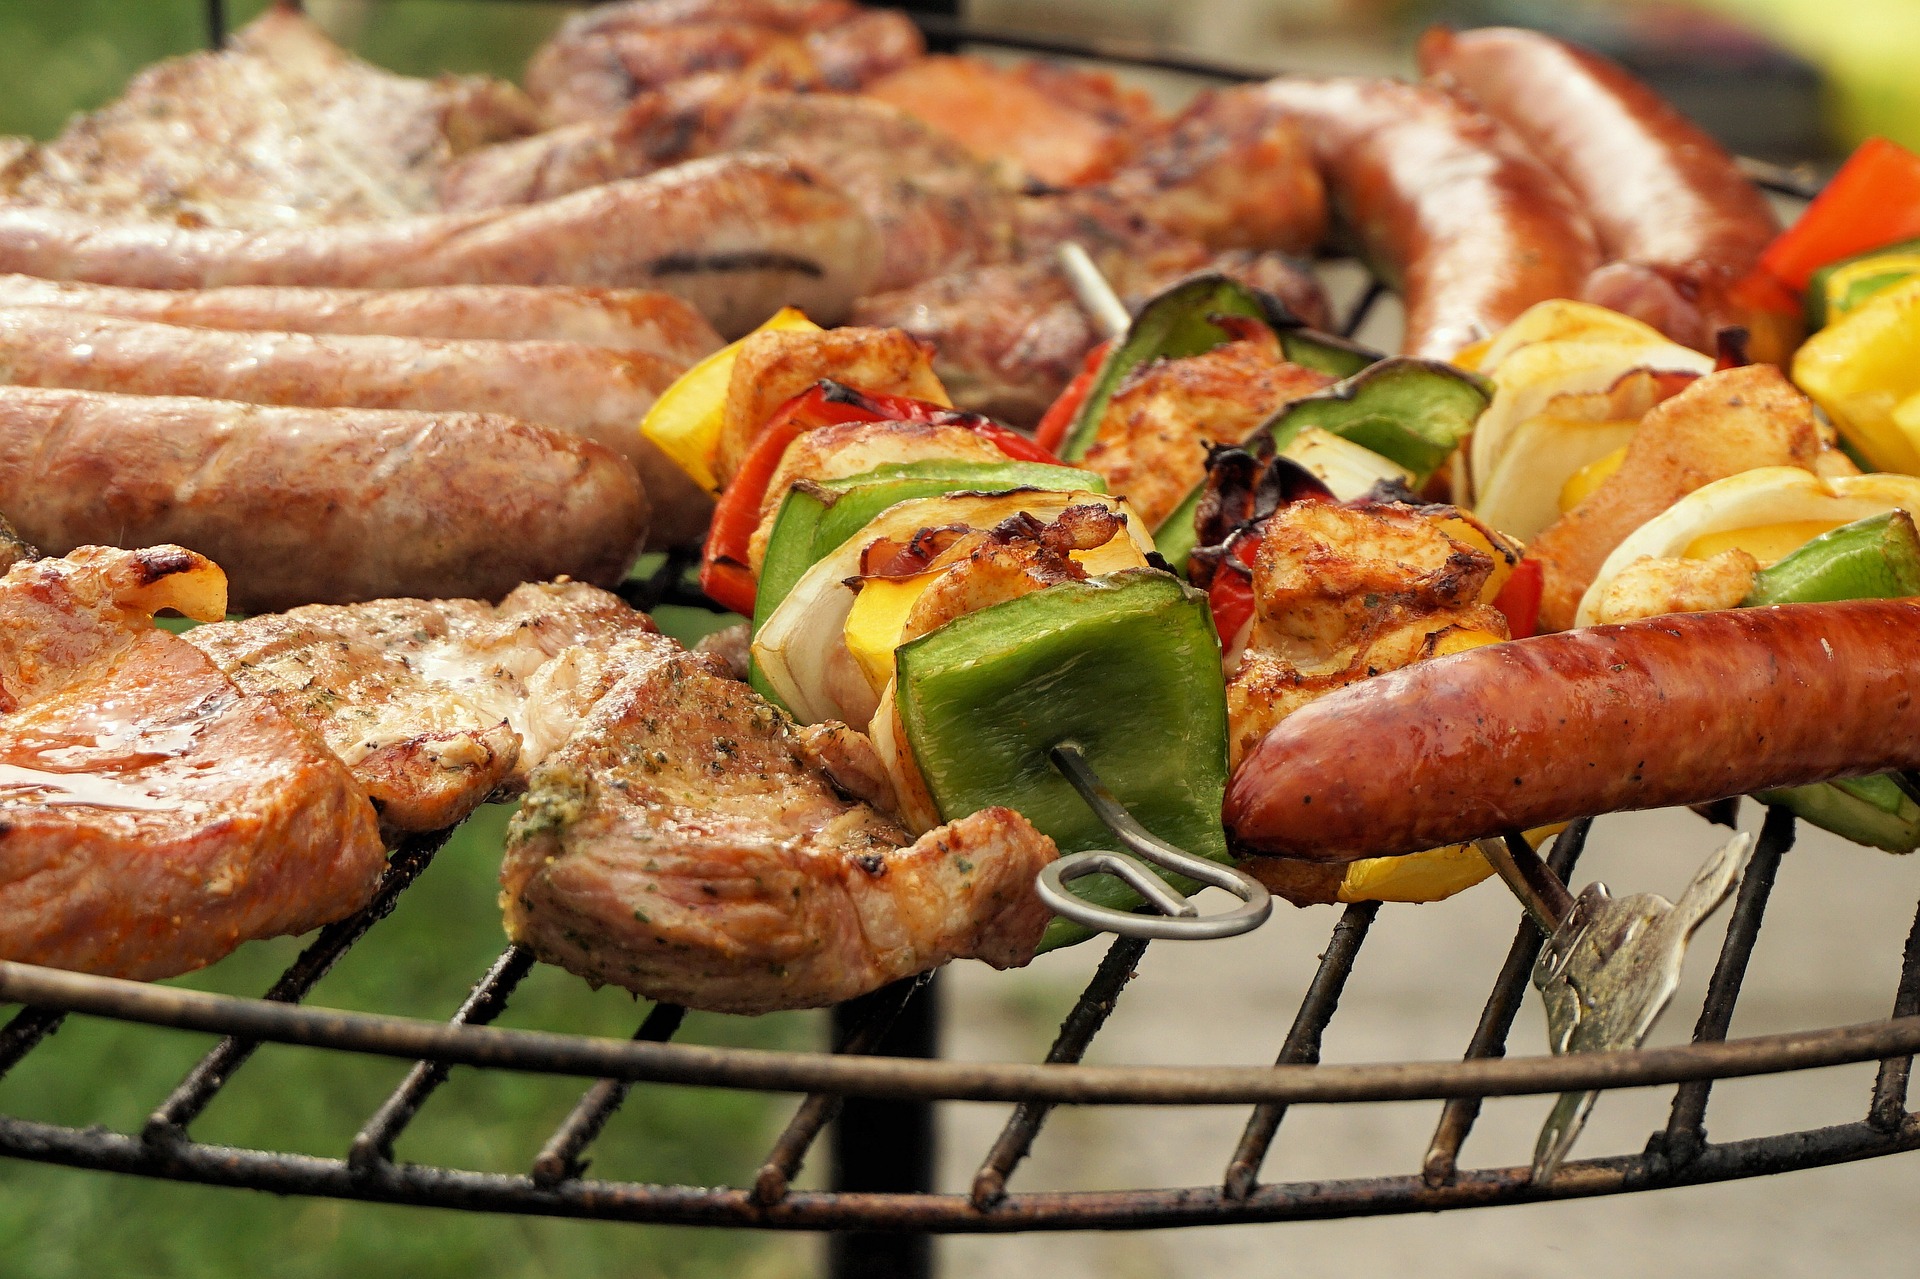 How to enjoy the perfect BBQ